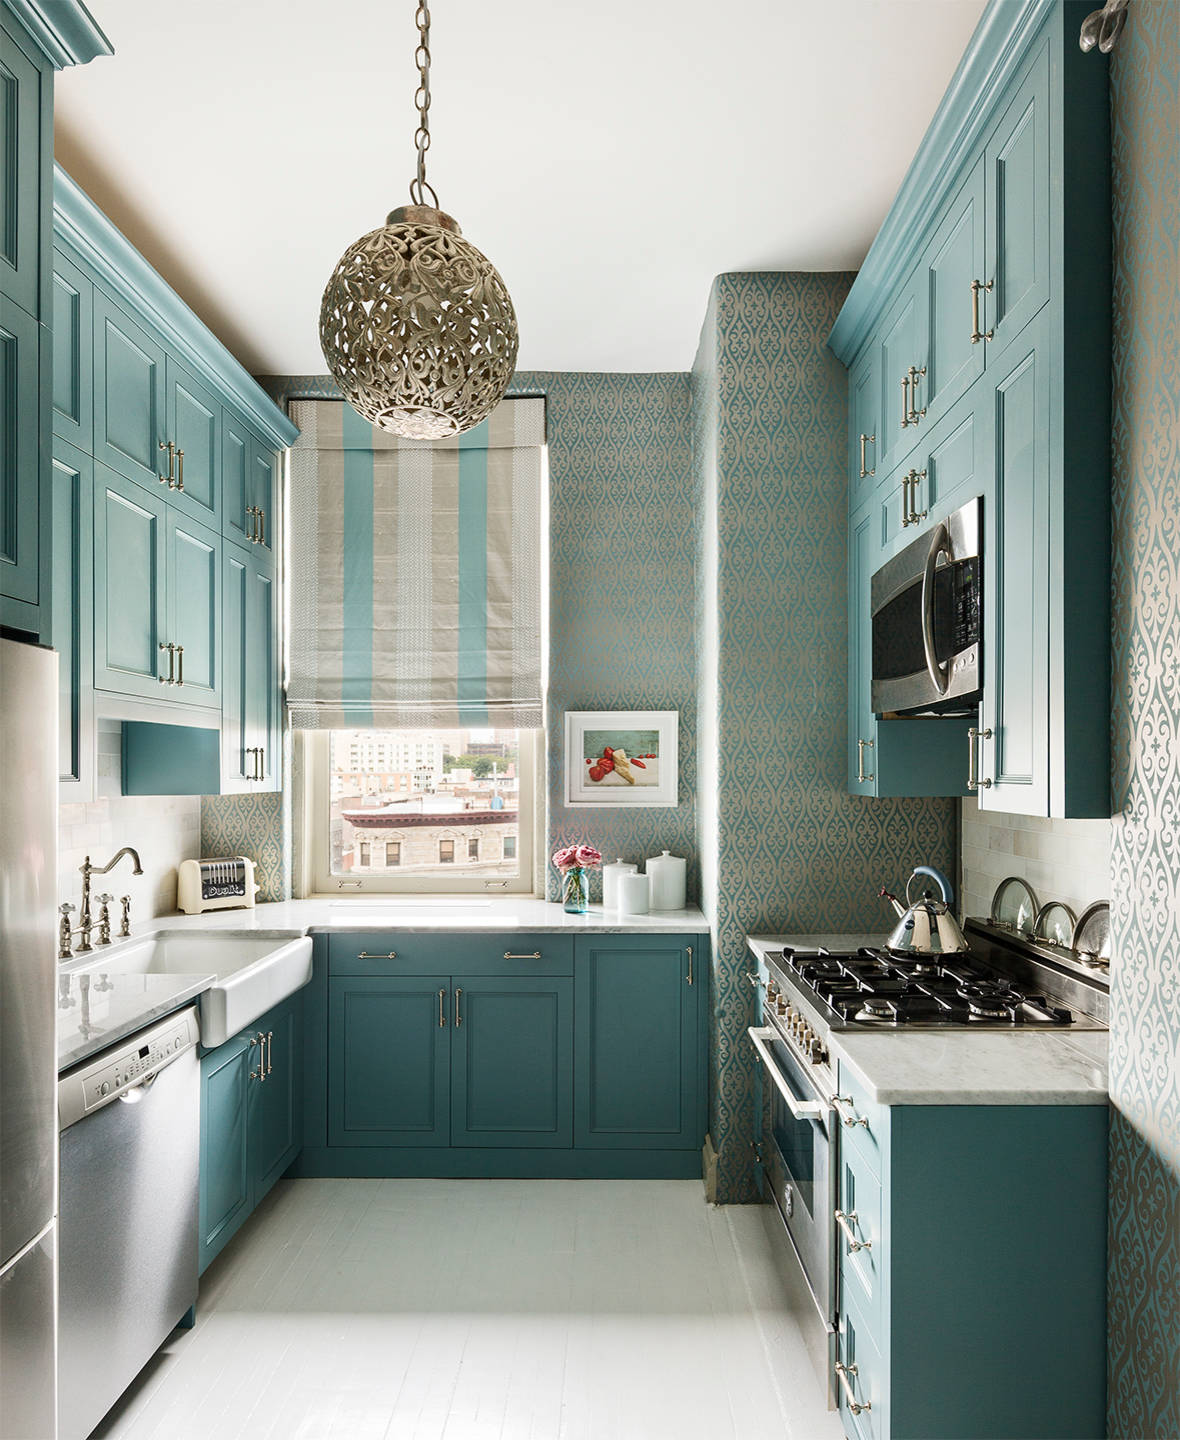 TURQUOISE TAKES OVER IN A SMALL KITCHEN MAKEOVER! COCOCOZY